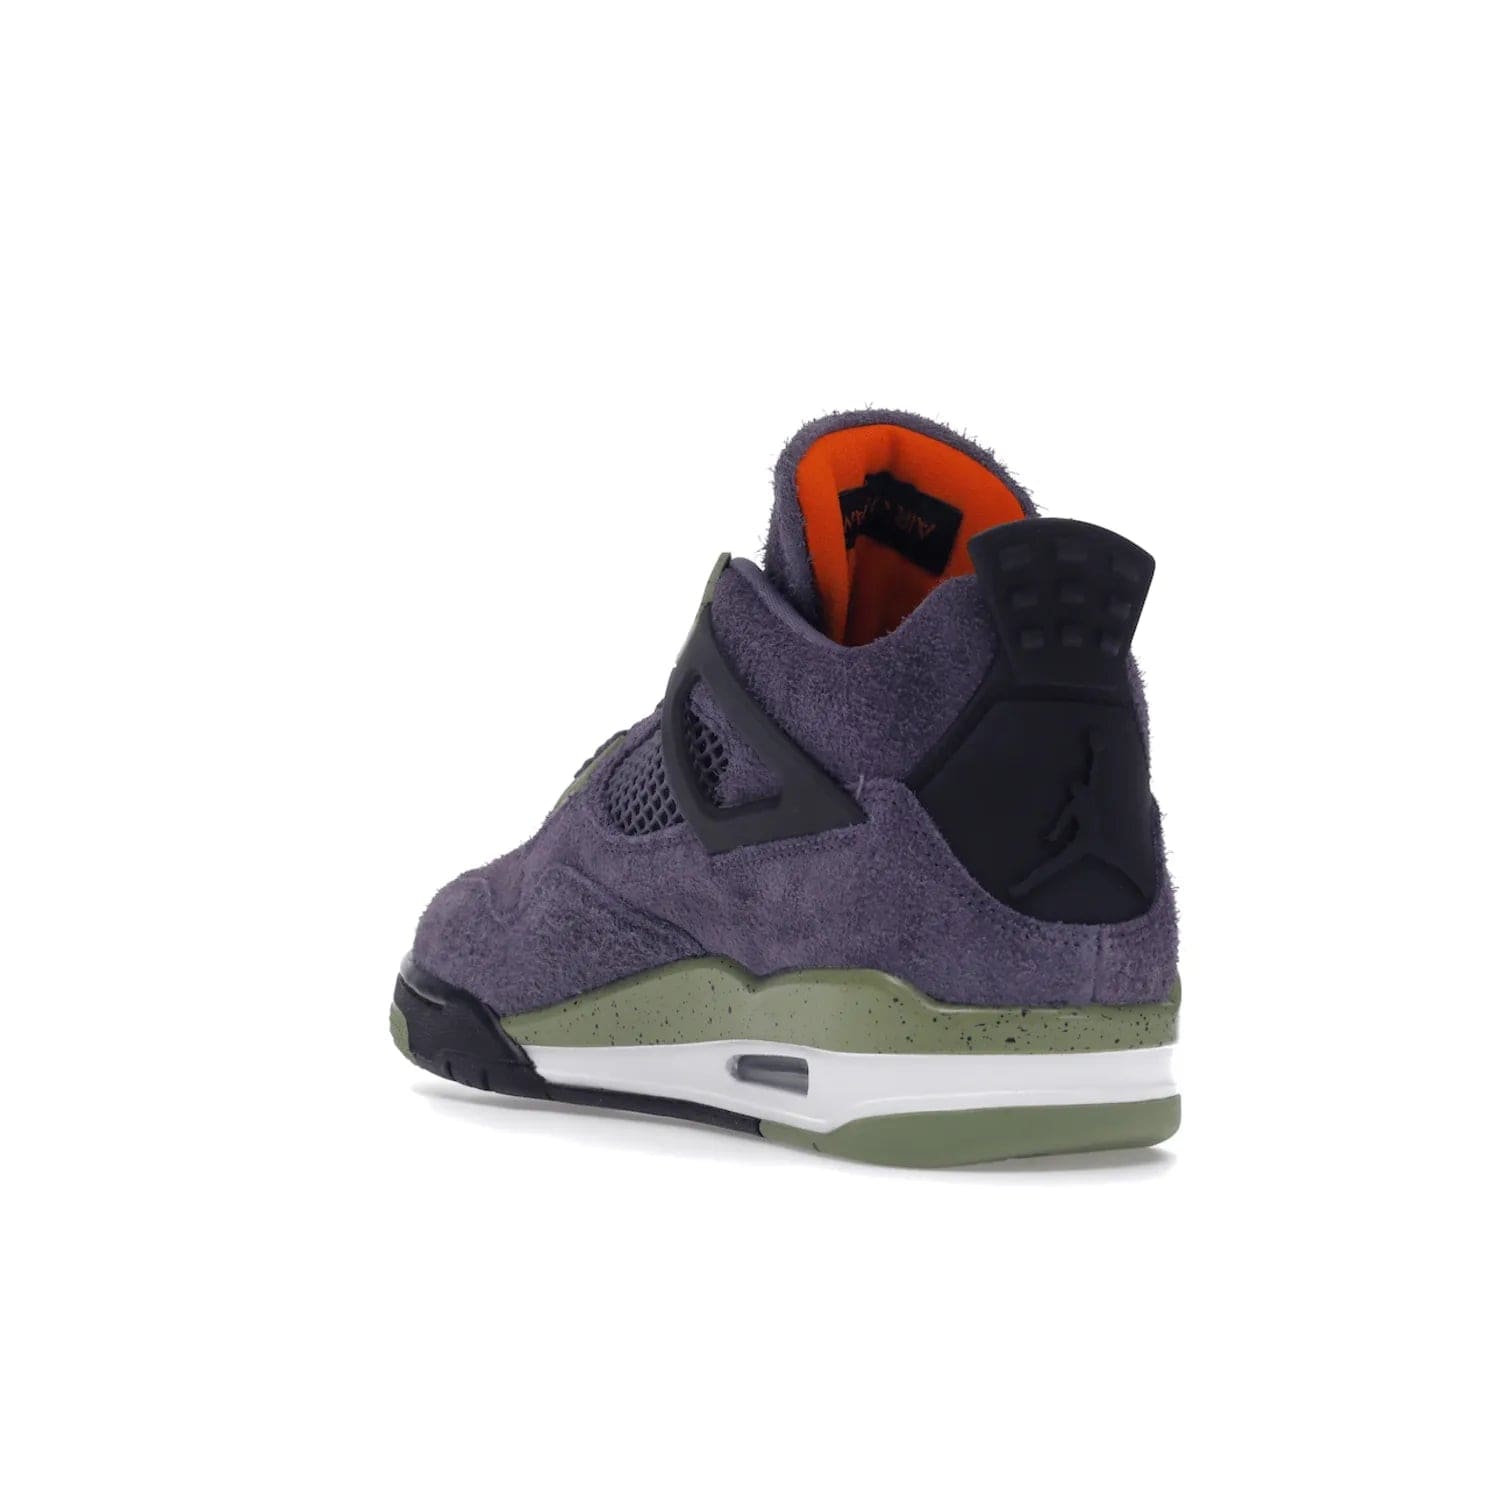 Jordan 4 Retro Canyon Purple (Women's) - Image 25 - Only at www.BallersClubKickz.com - New Air Jordan 4 Retro Canyon Purple W sneaker features shaggy purple suede, lime highlights & safety orange Jumpman branding. Classic ankle-hugging silhouette with modern colors released 15/10/2022.